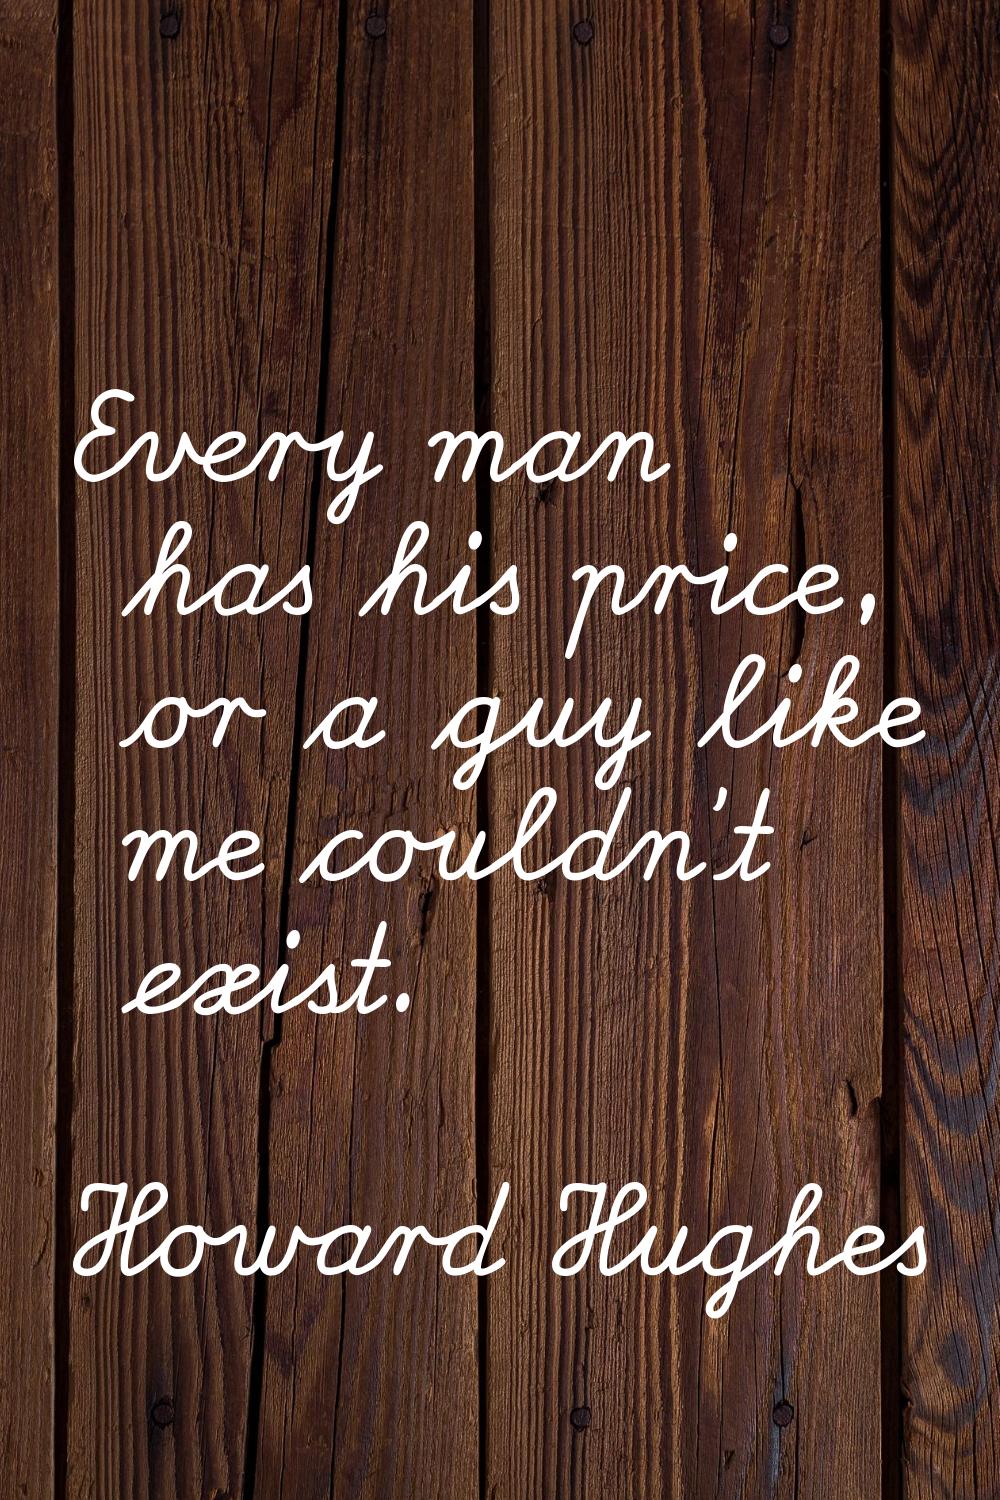 Every man has his price, or a guy like me couldn't exist.